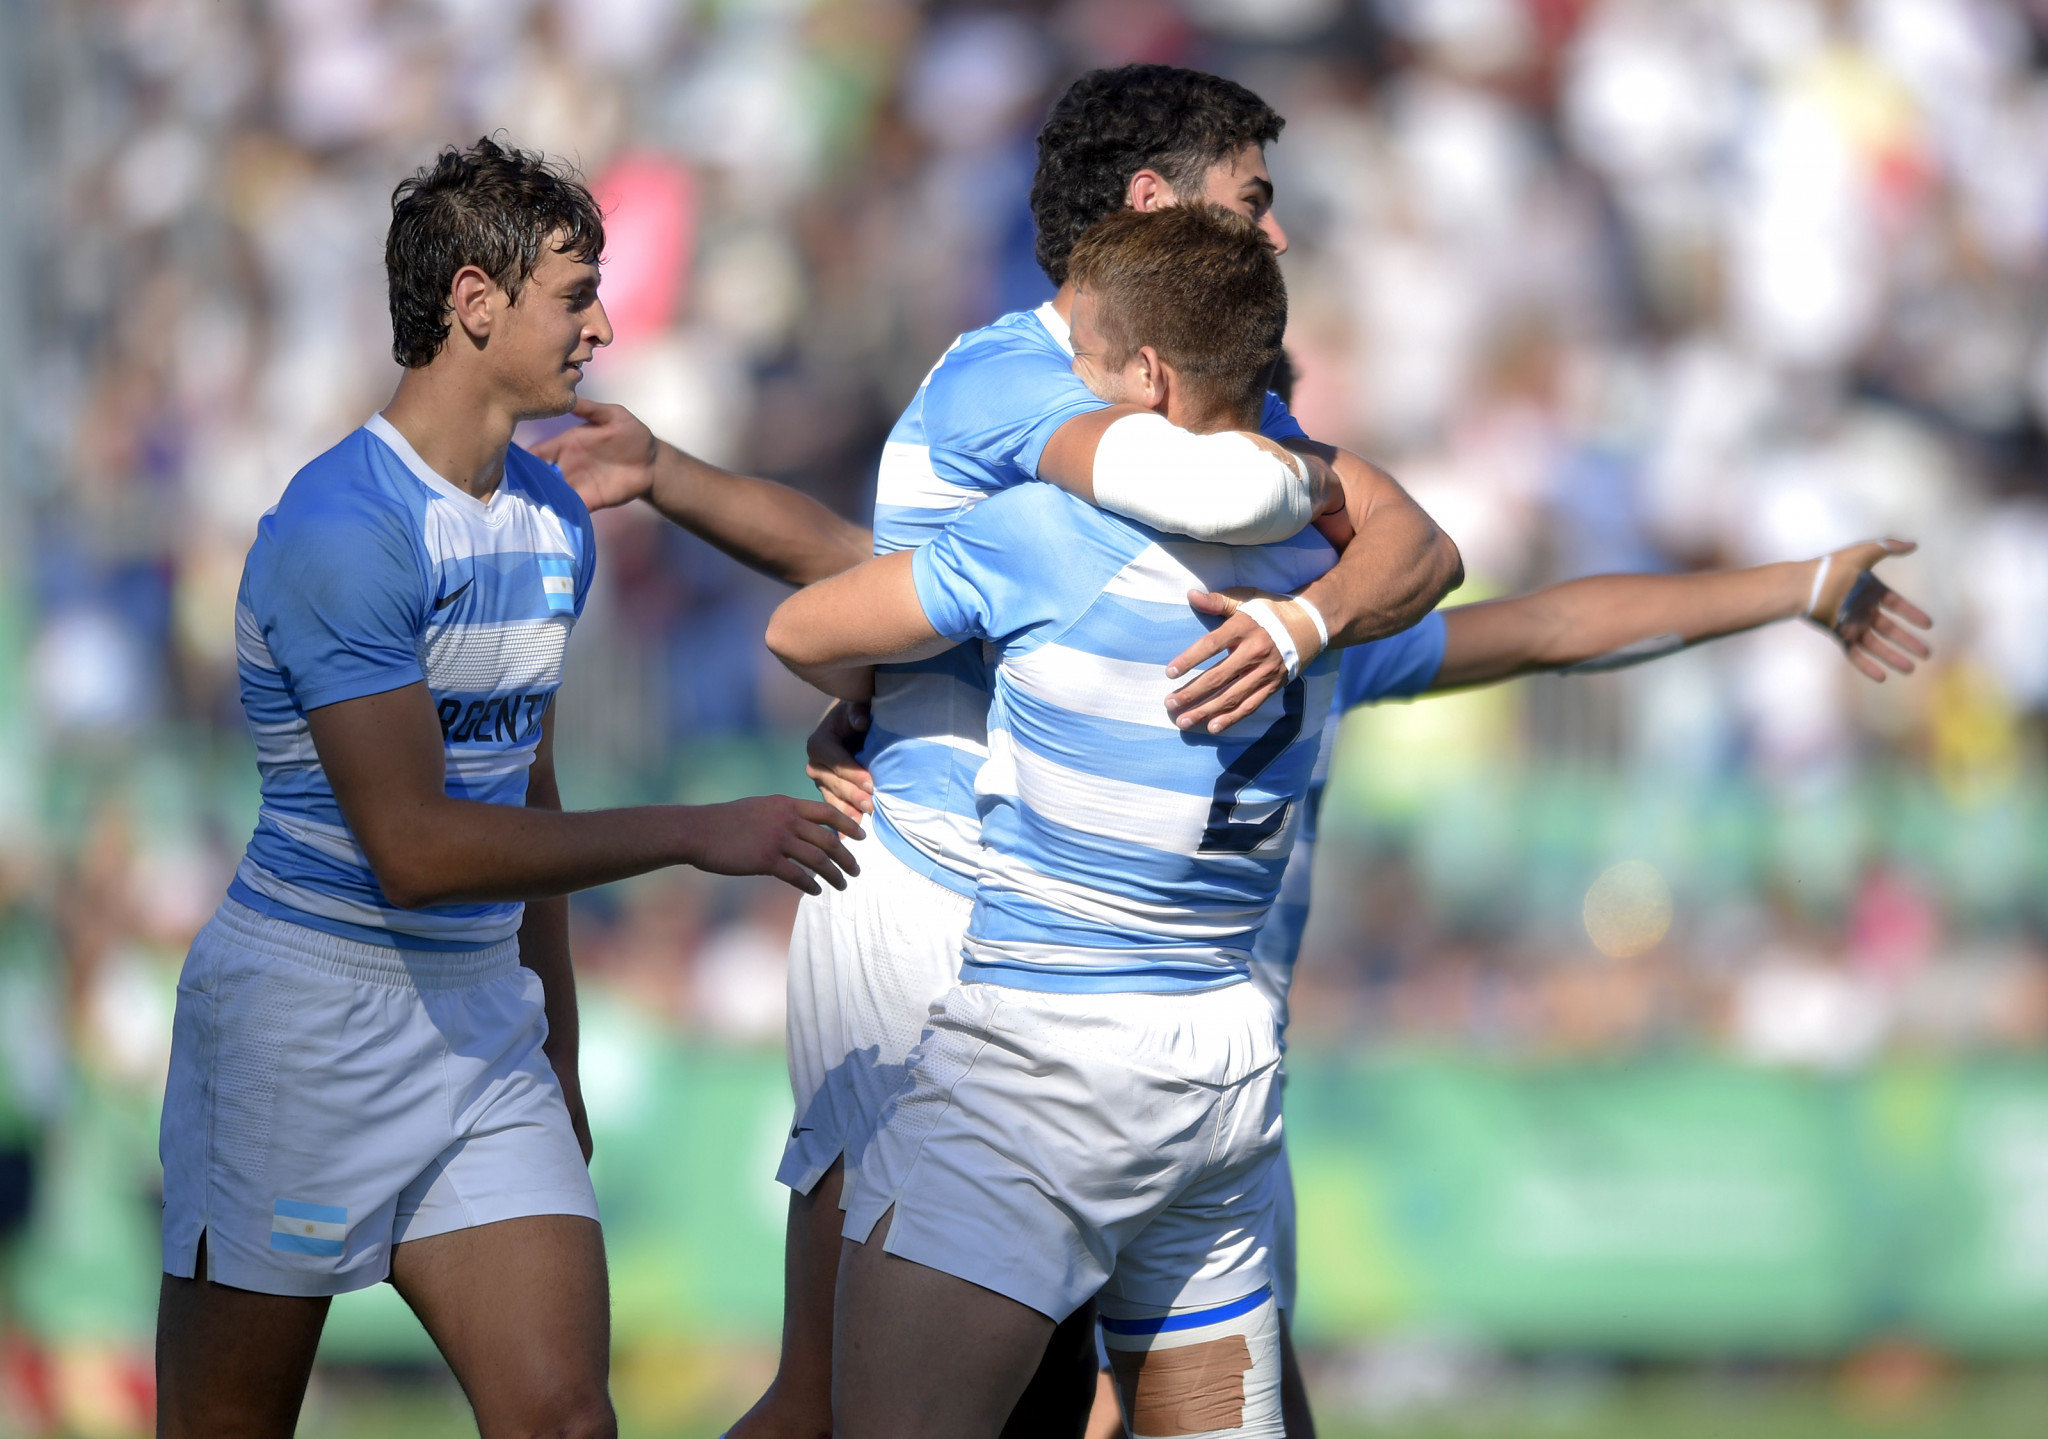 Rugby sevens titles claimed at Buenos Aires 2018 as future gymnastics stars continue emergence